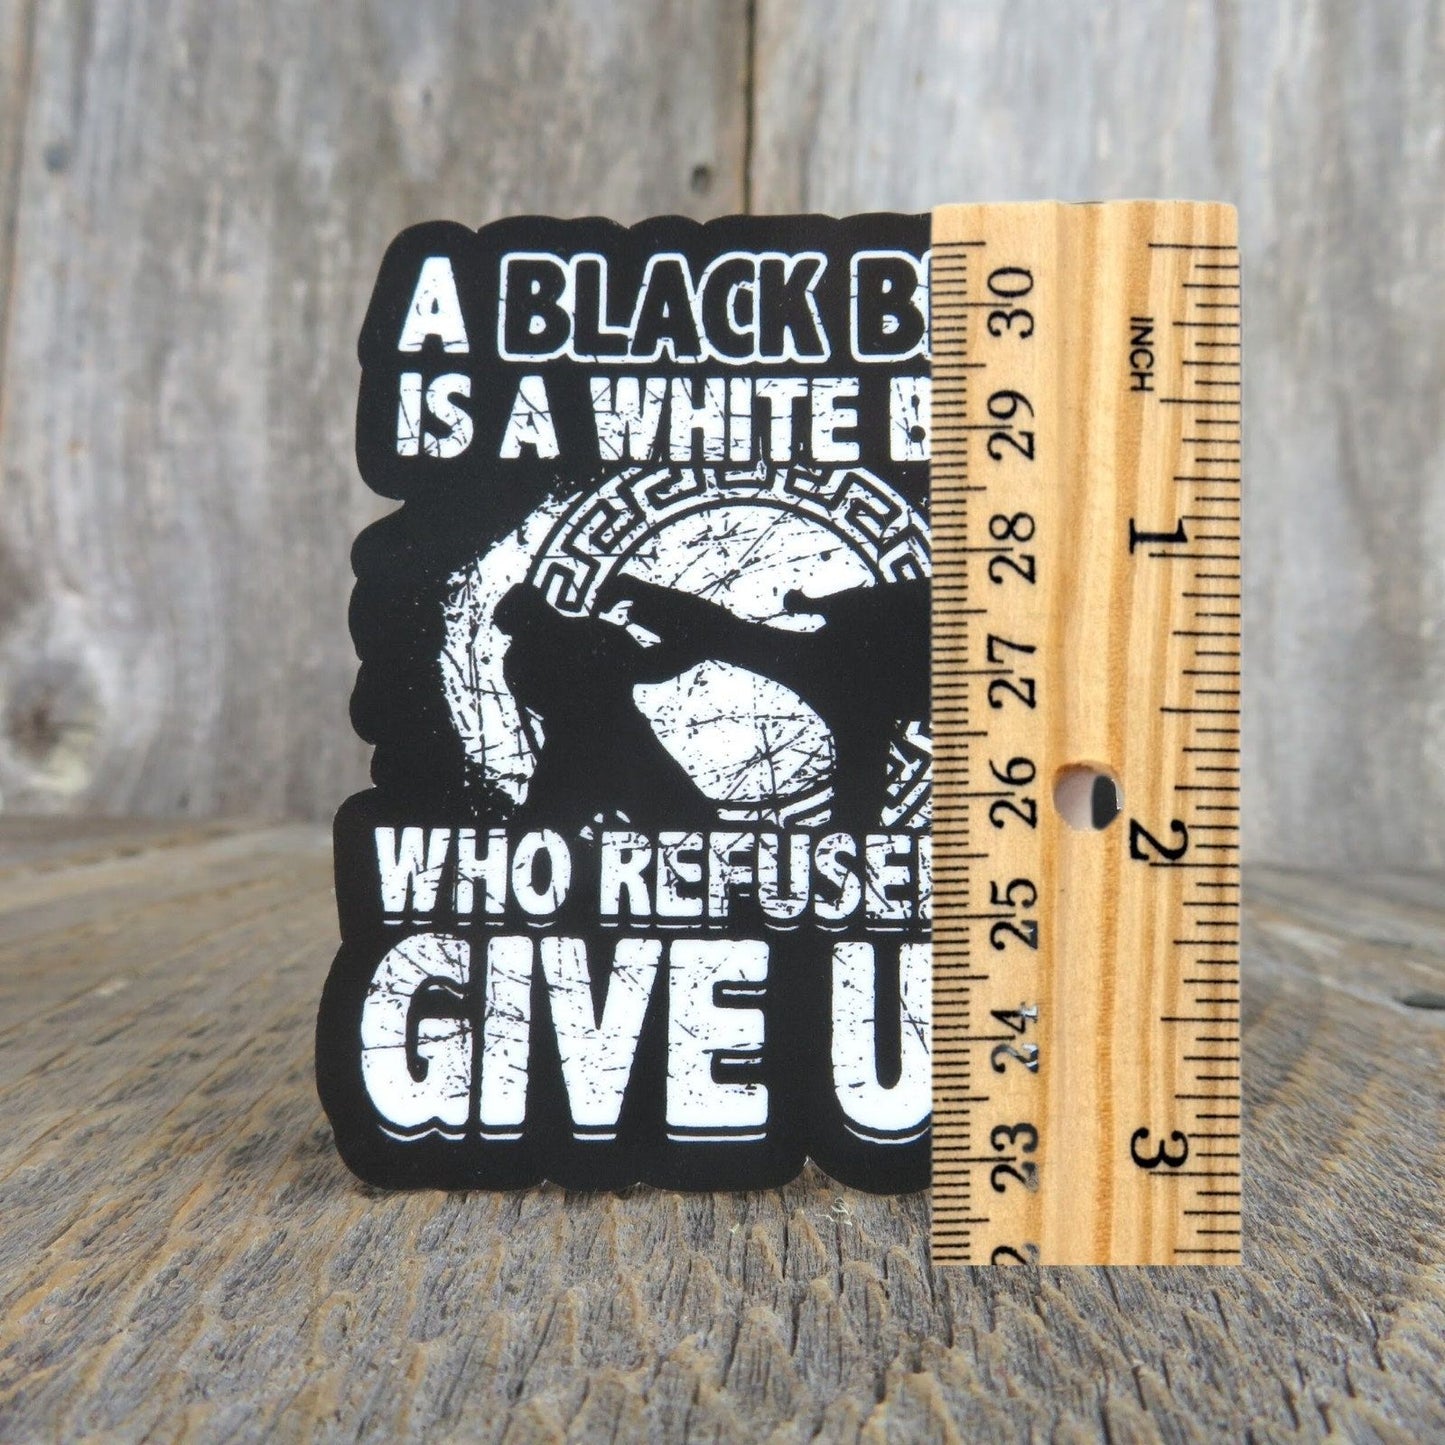 A Black Belt is a White Belt Who Refuses To Give Up Sticker Martial Arts Encouraging Positive Waterproof